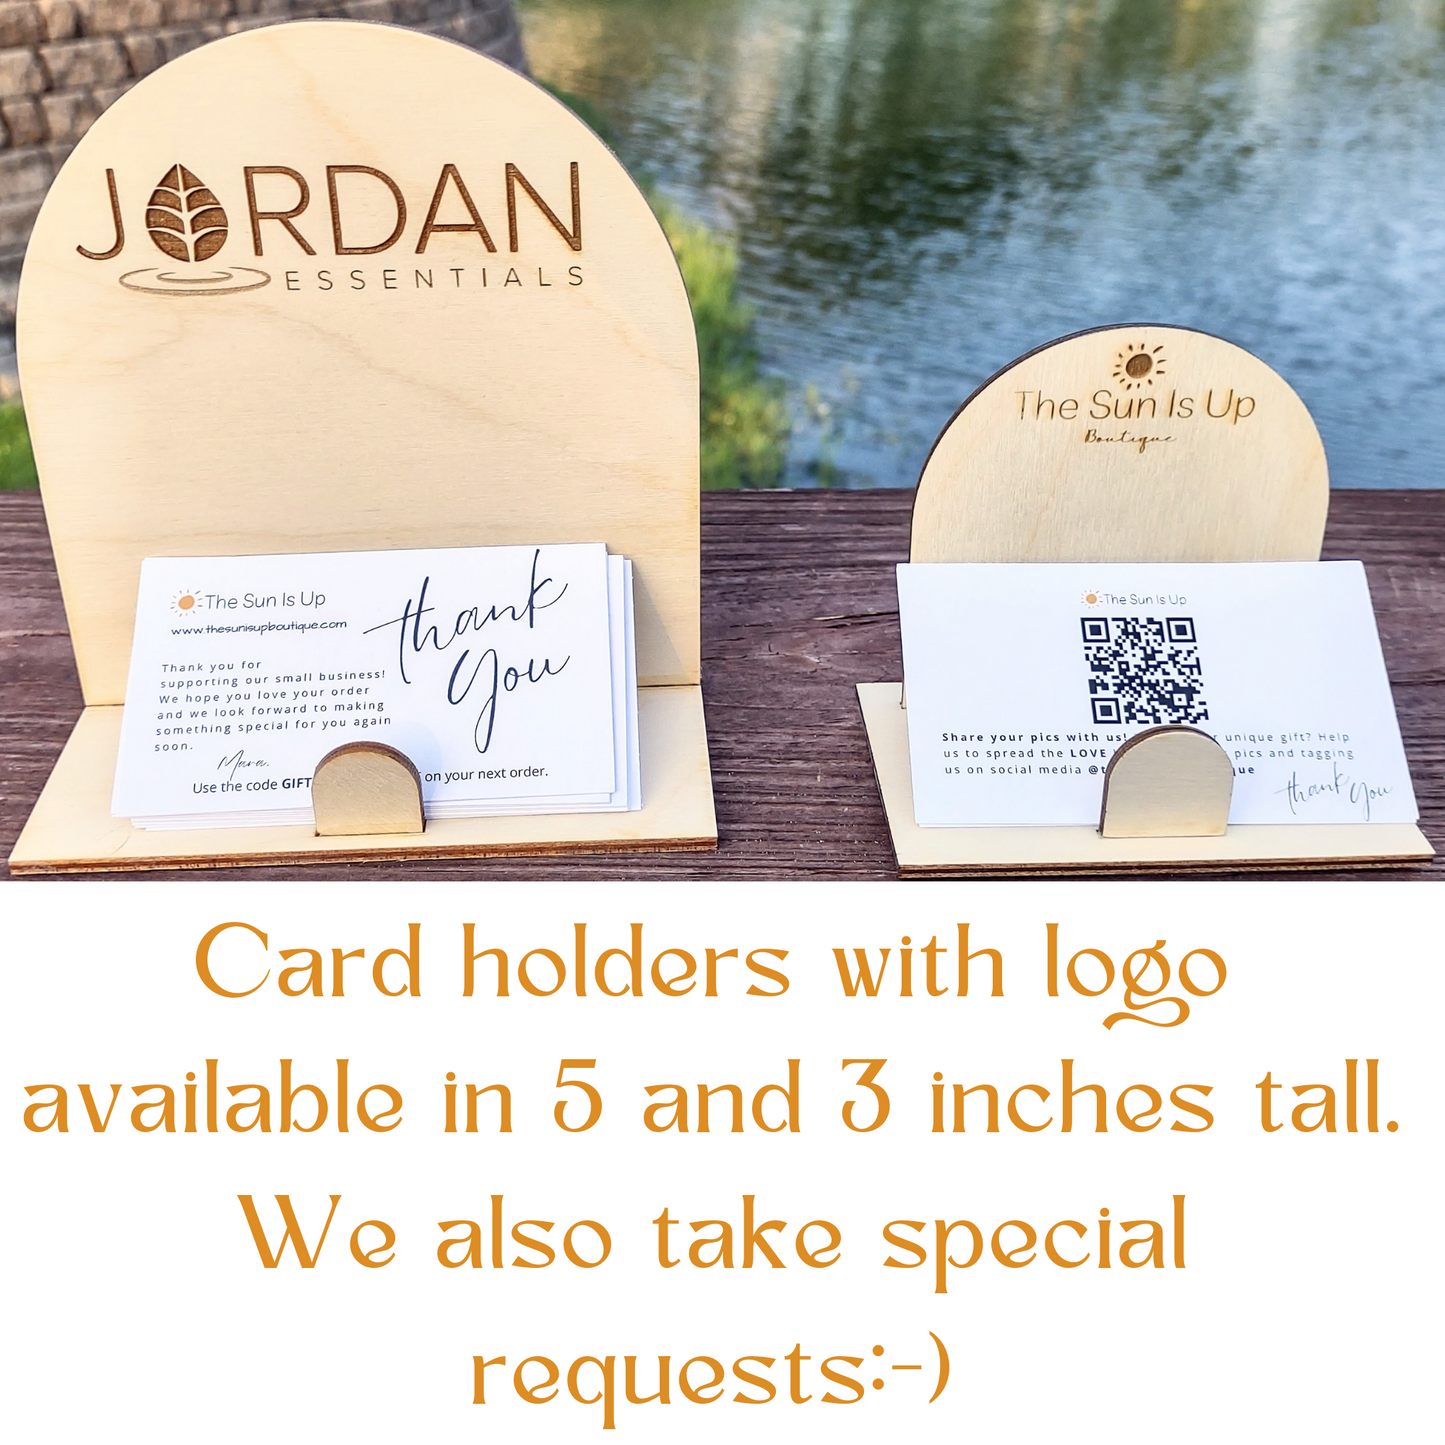 Personalized Business Stand and Business Card Holder